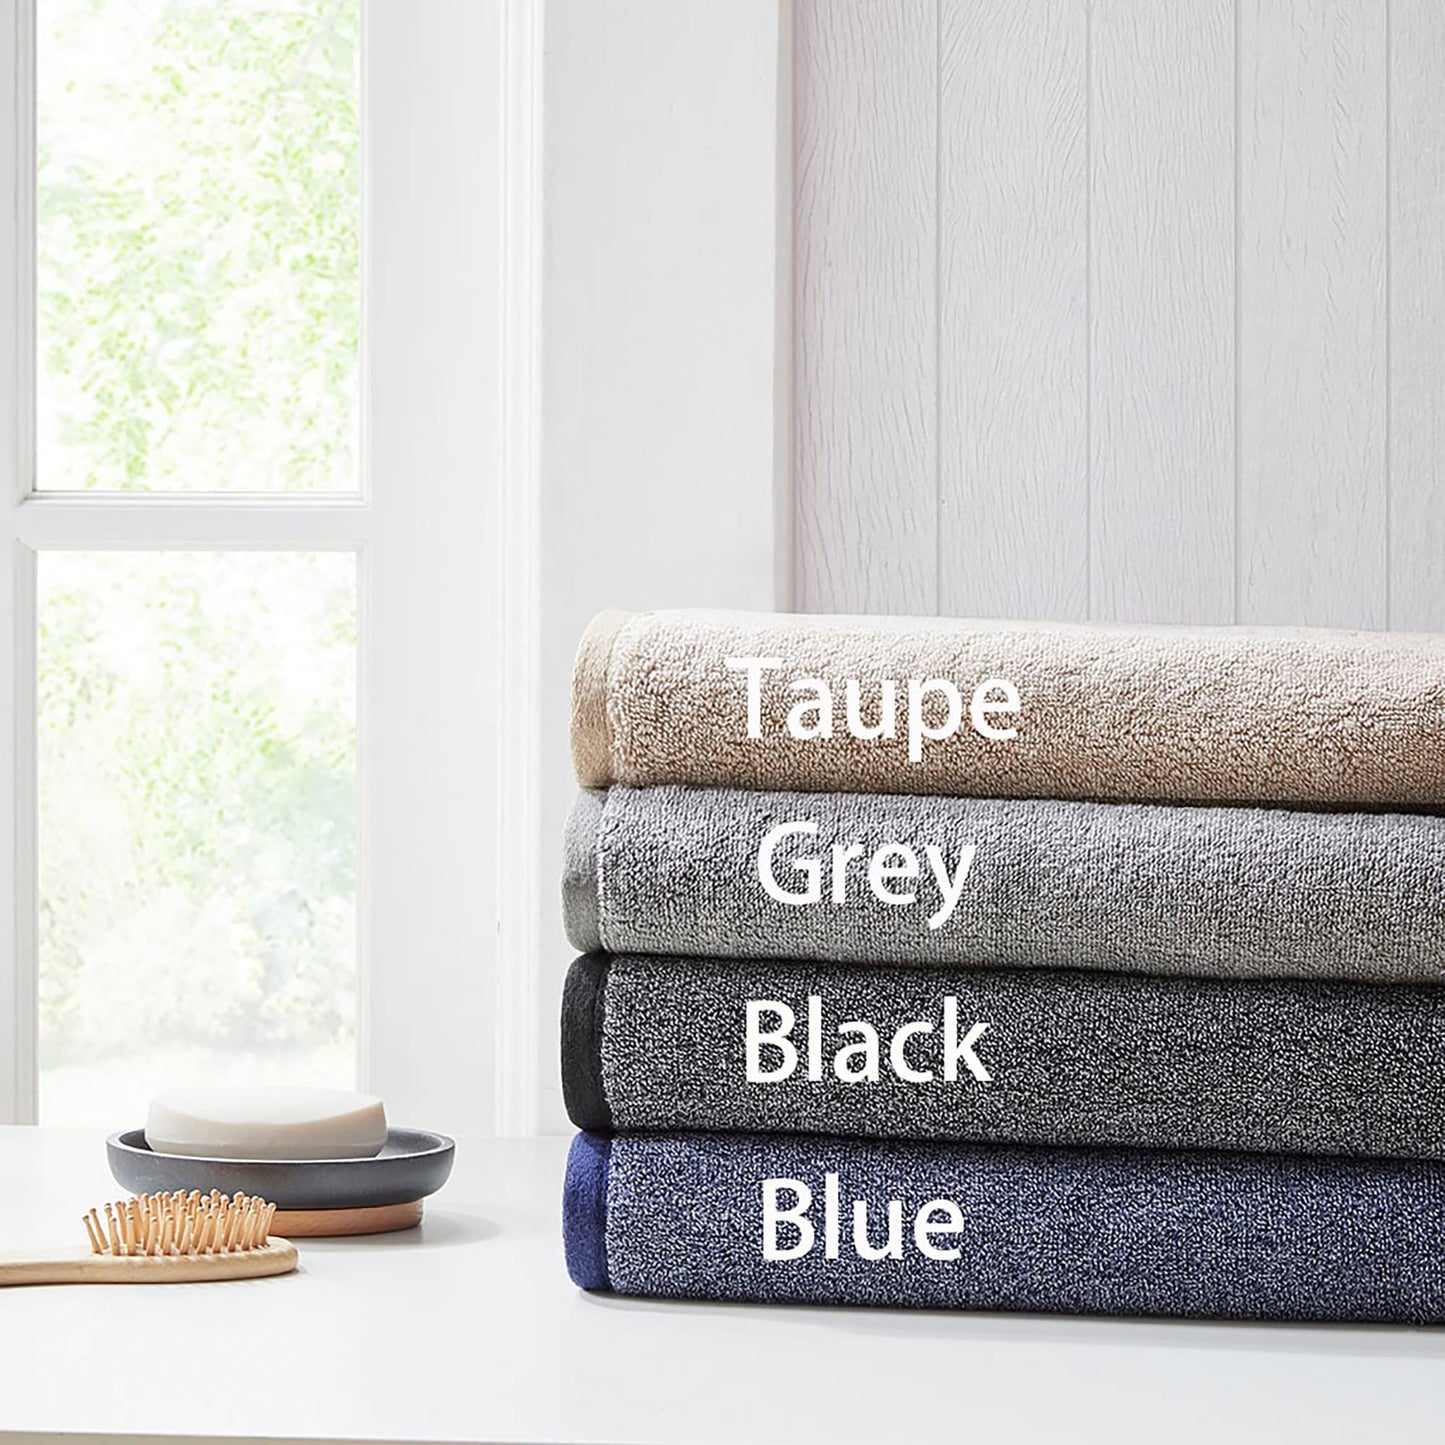 Woolrich Marle 100% Cotton Dobby Yarn Dyed Luxurious Bath Towel Set, Silky Soft, Highly Absorbent, Cabin Lifestyle Premium Spa Quality, Multi-Sizes, Grey 6 Piece